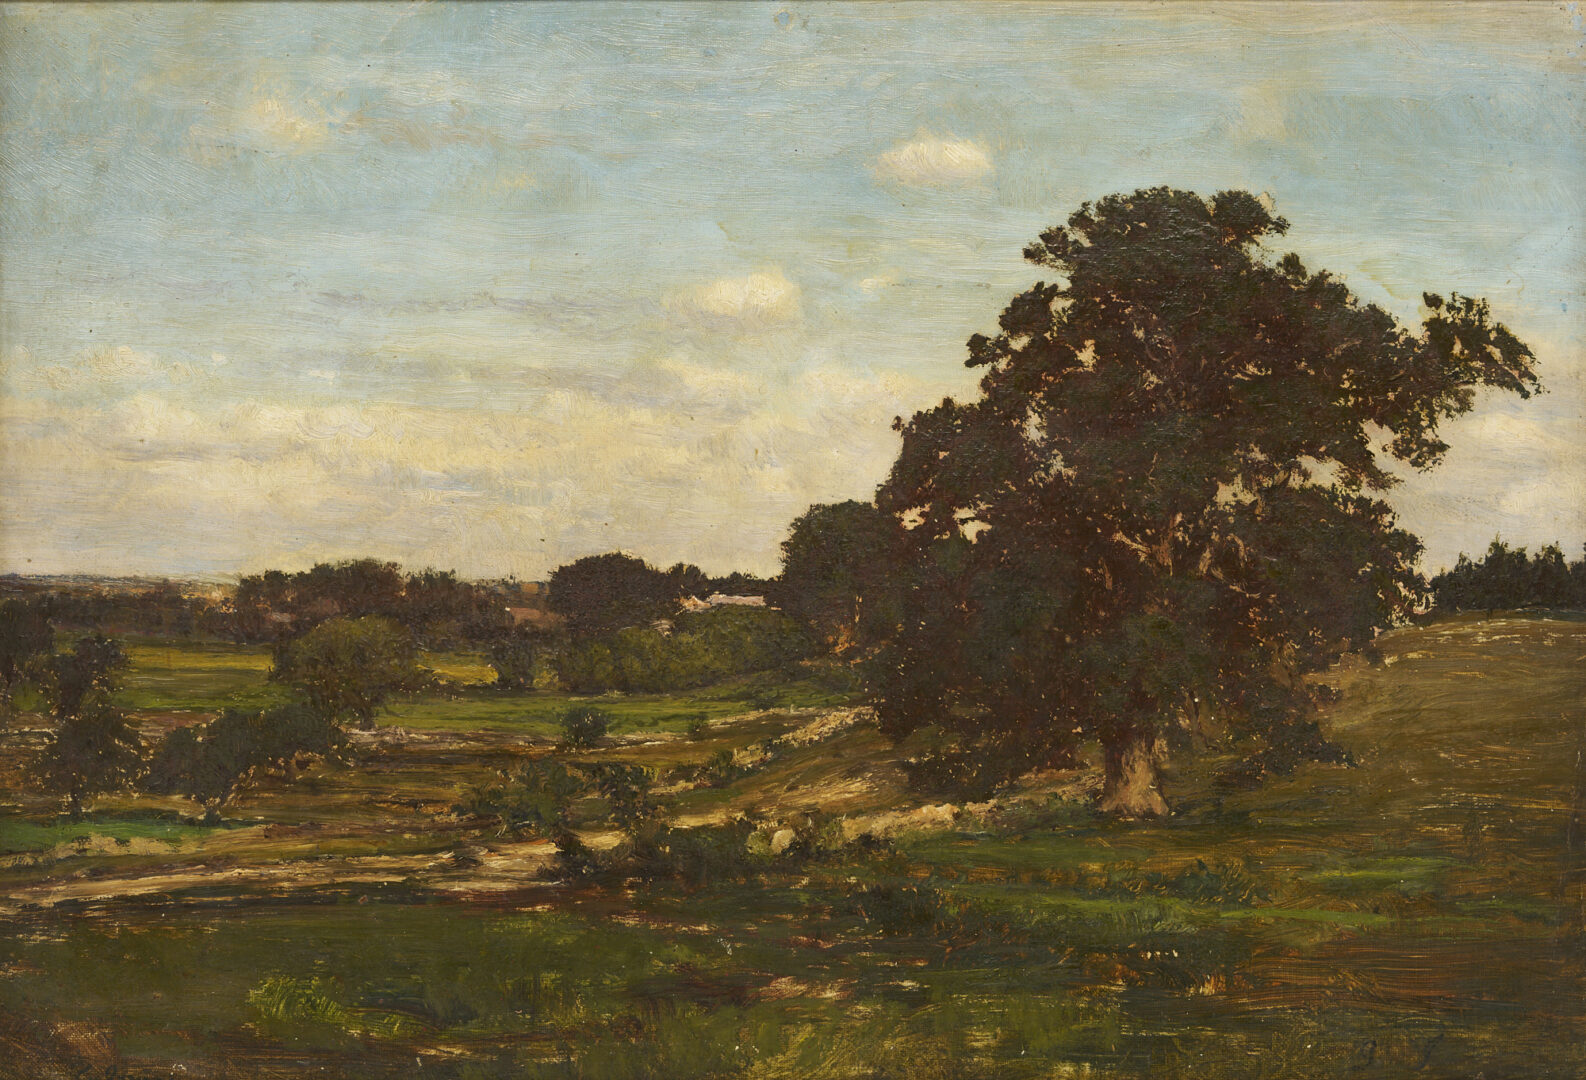 Lot 108: George Inness O/C Landscape with a Large Tree, c. 1856